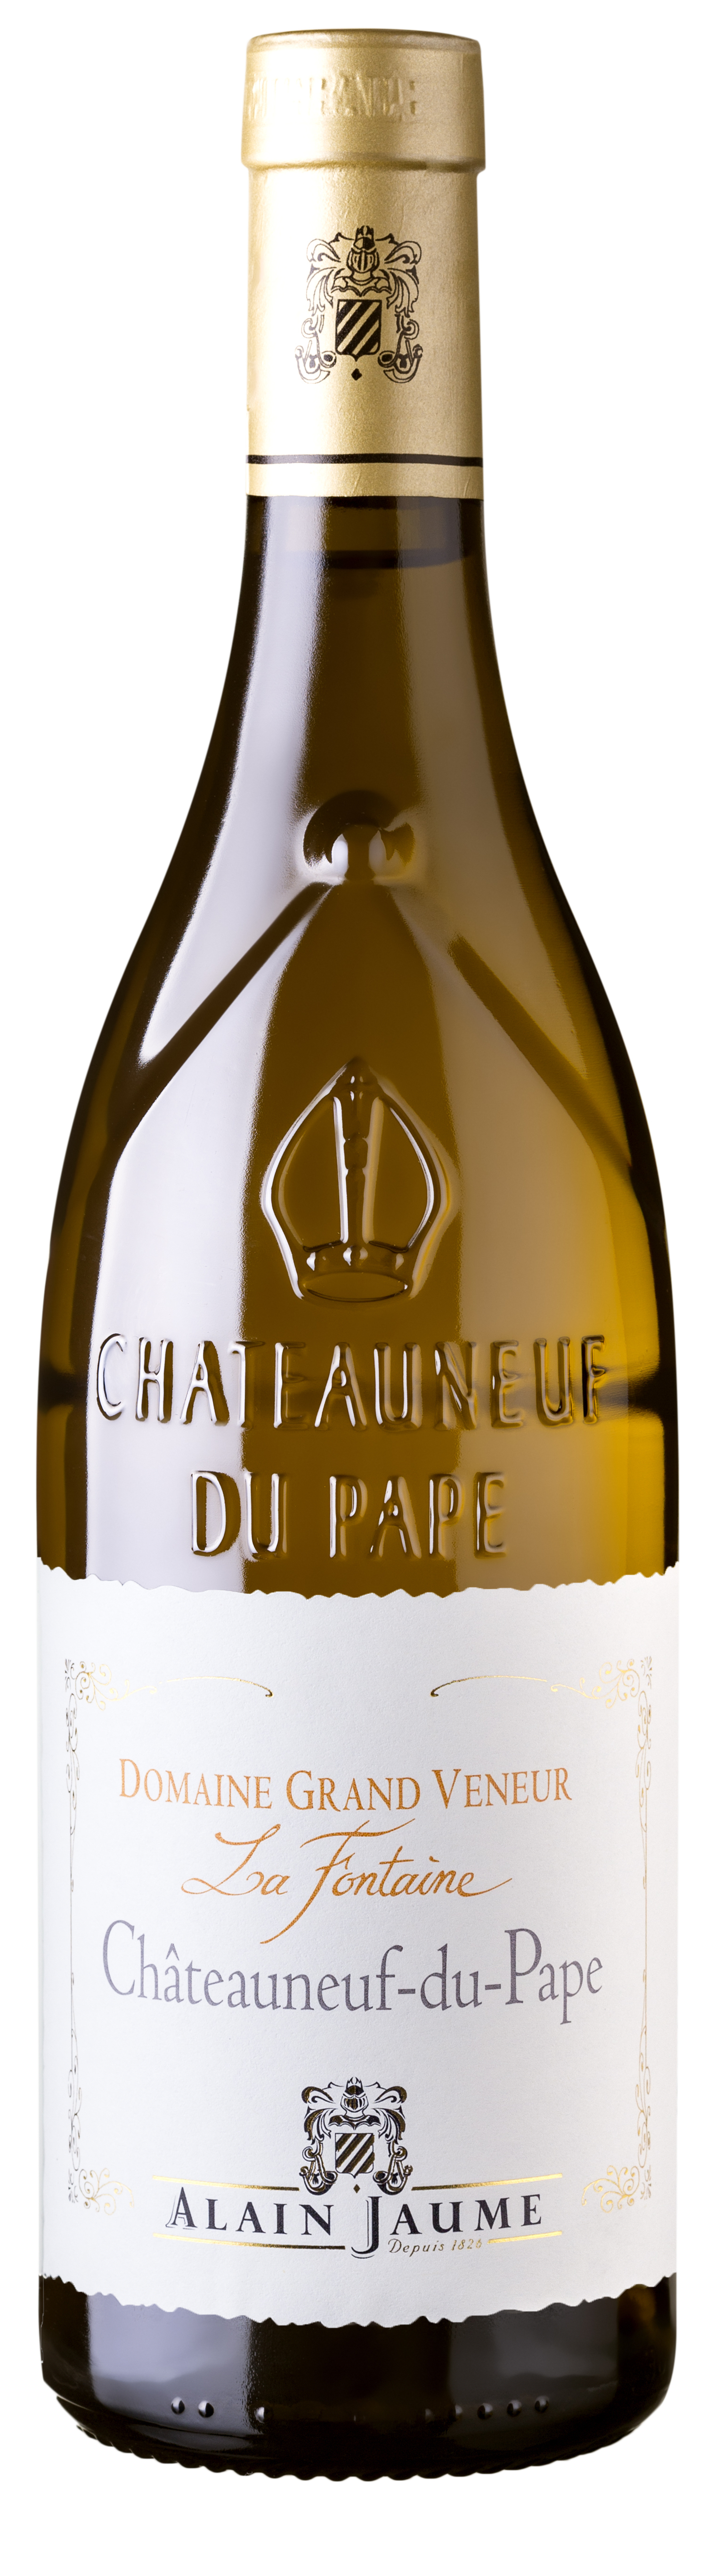 Wines United - Chateauneuf - Veneur States Blanc Timeless the Wine Wines - 2021 | French Fontaine - Cabernet - - - California Du Pape Chardonnay Order from La Spanish Savignon Wines Online Port Wines Grand